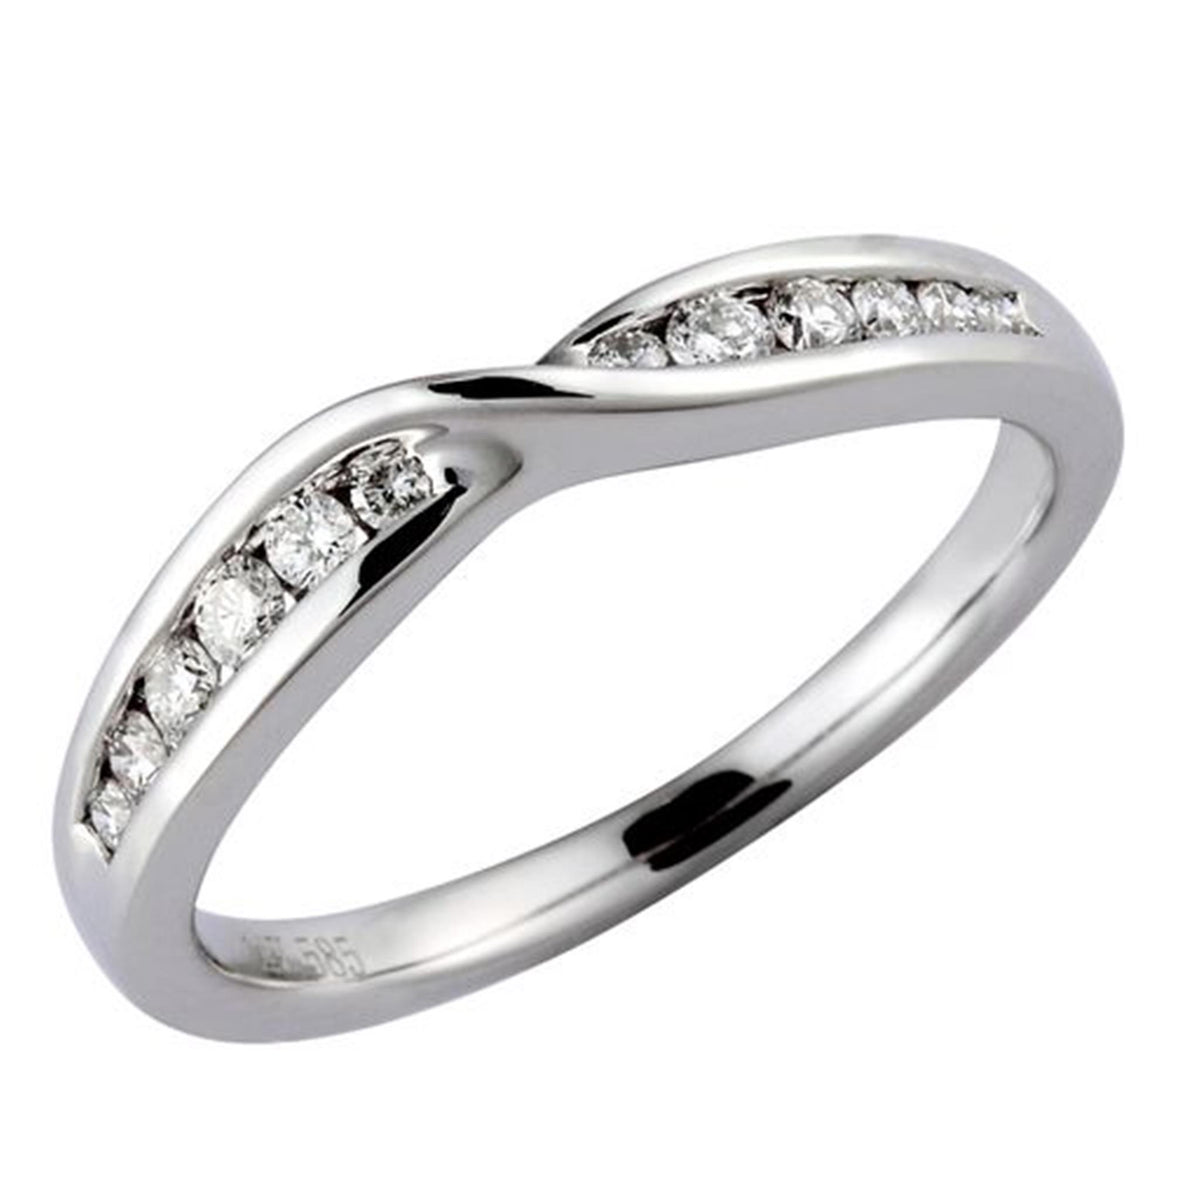 14Kt White Gold Channel Set Wedding Ring With 0.21cttw Natural Diamonds